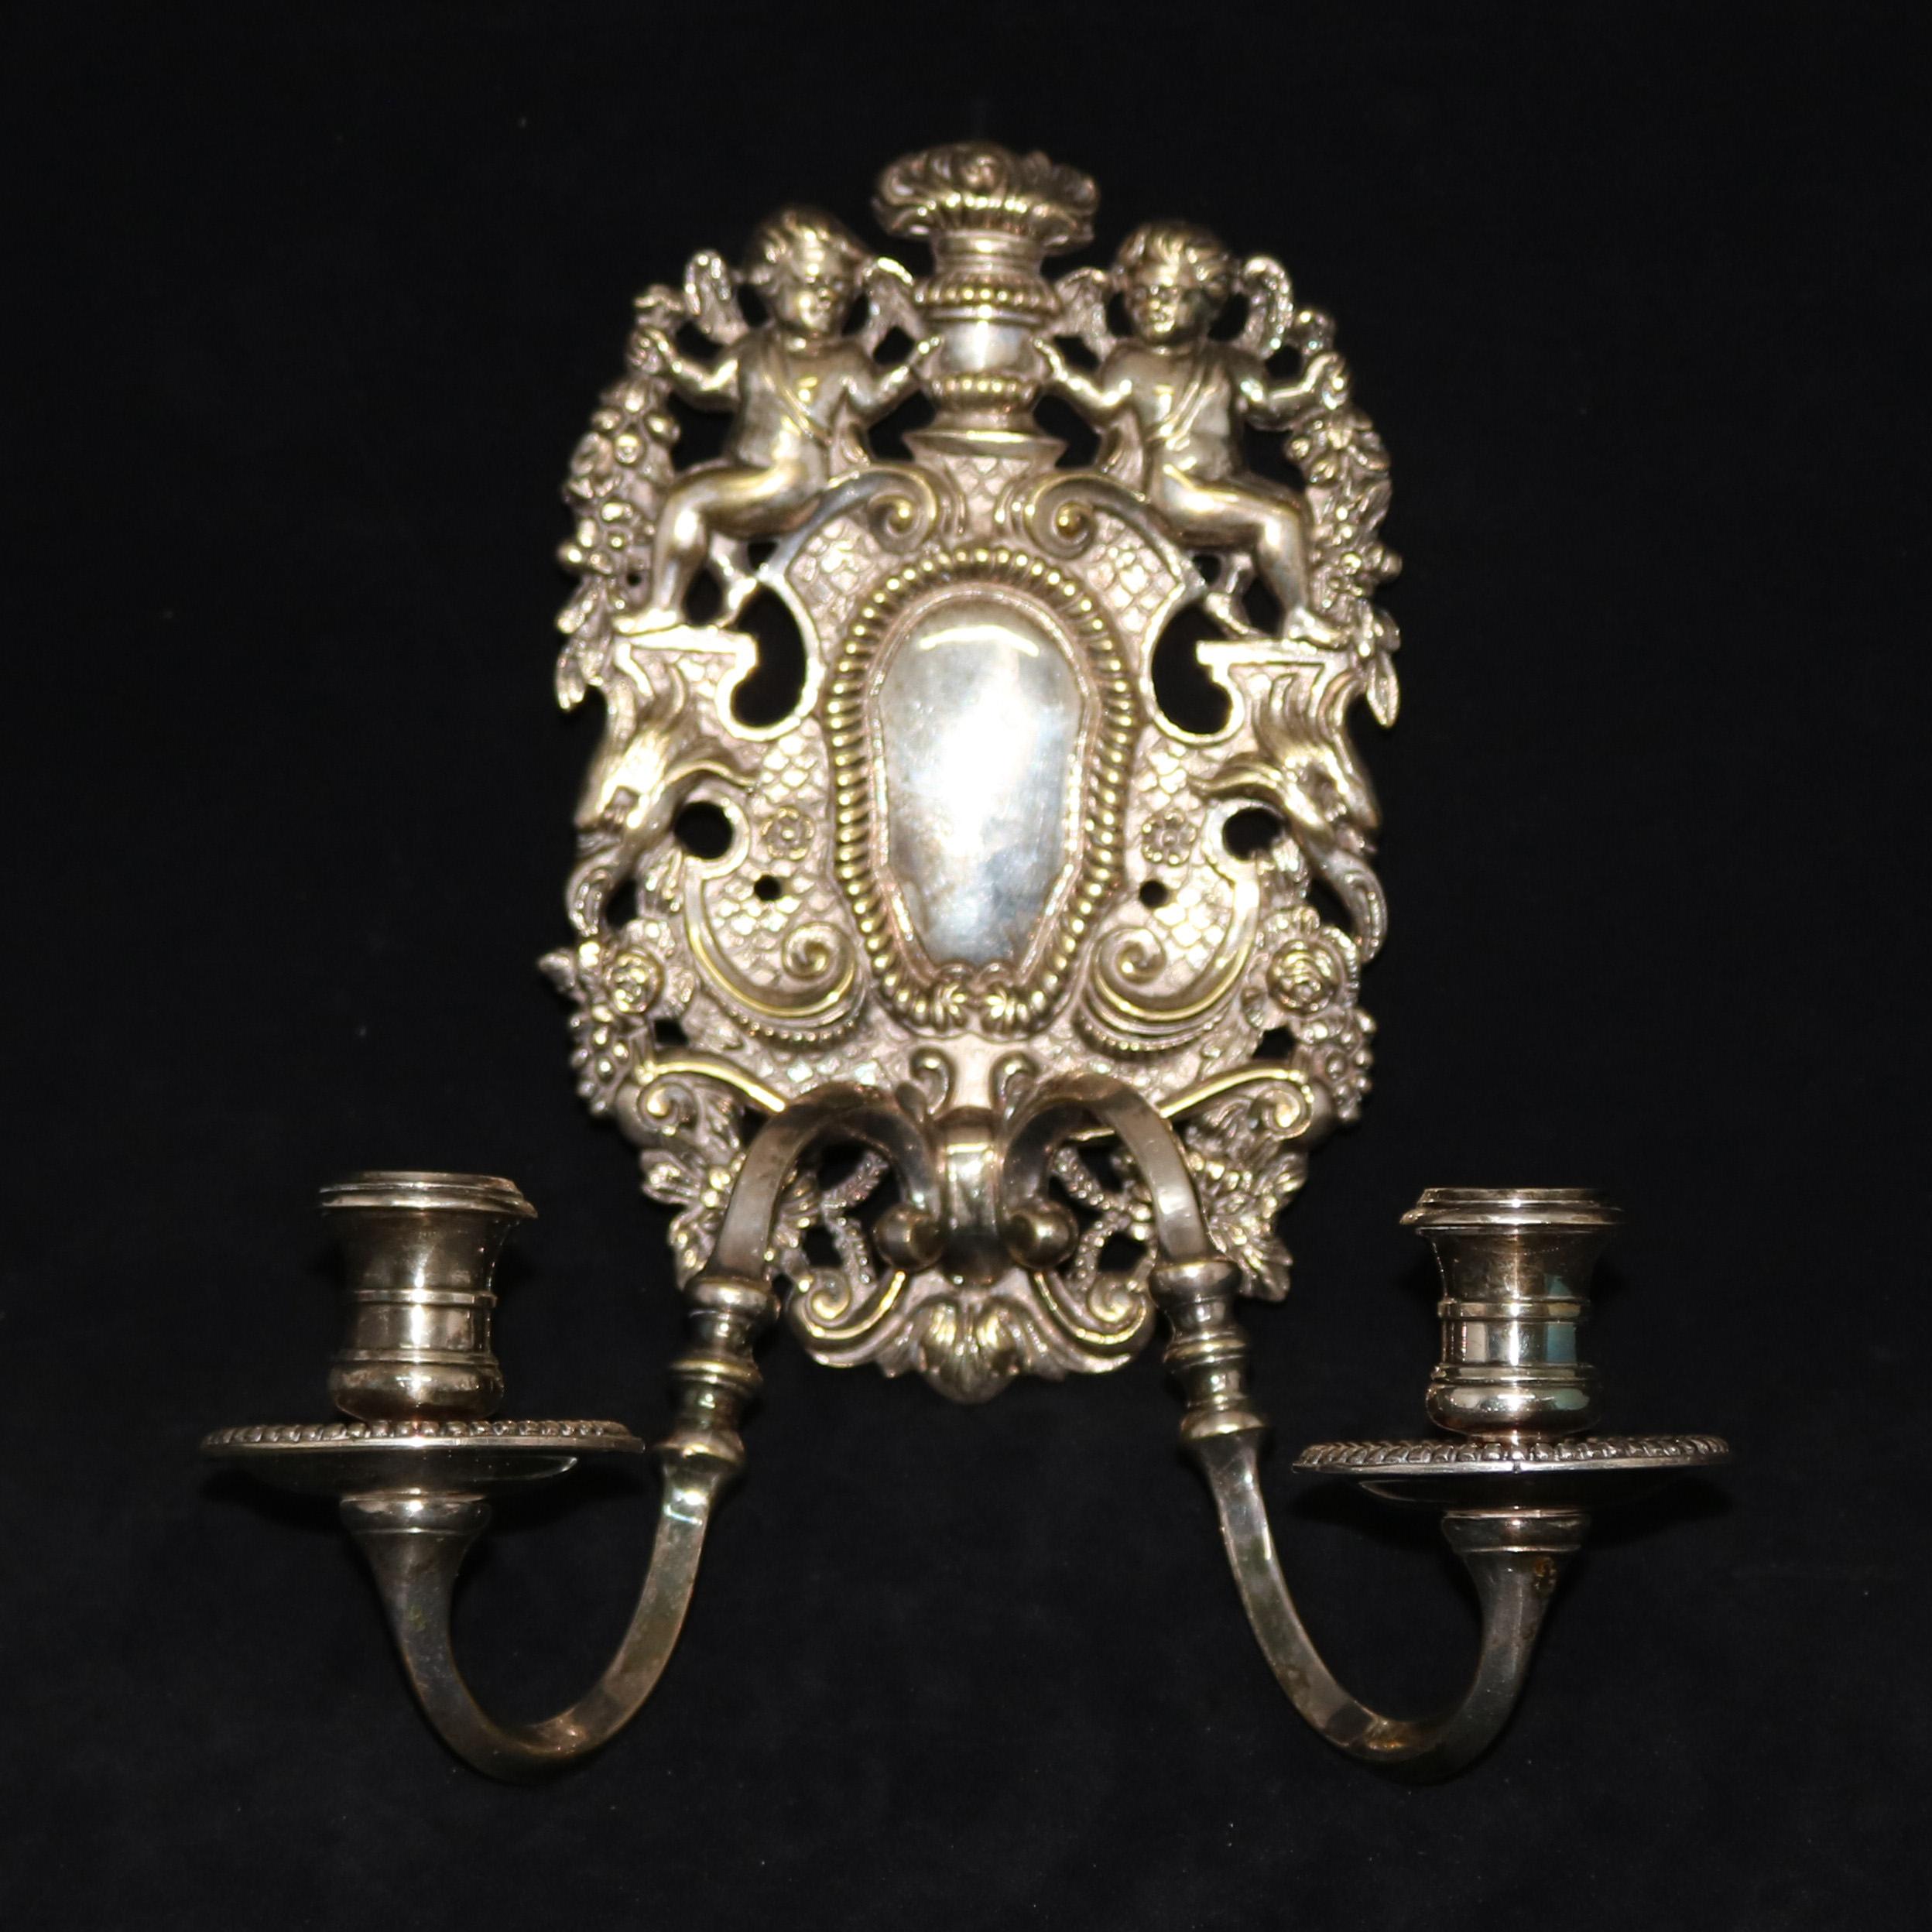 Cast Pair of French Neoclassical Figural Cherub Gilt Metal Candle Wall Sconces